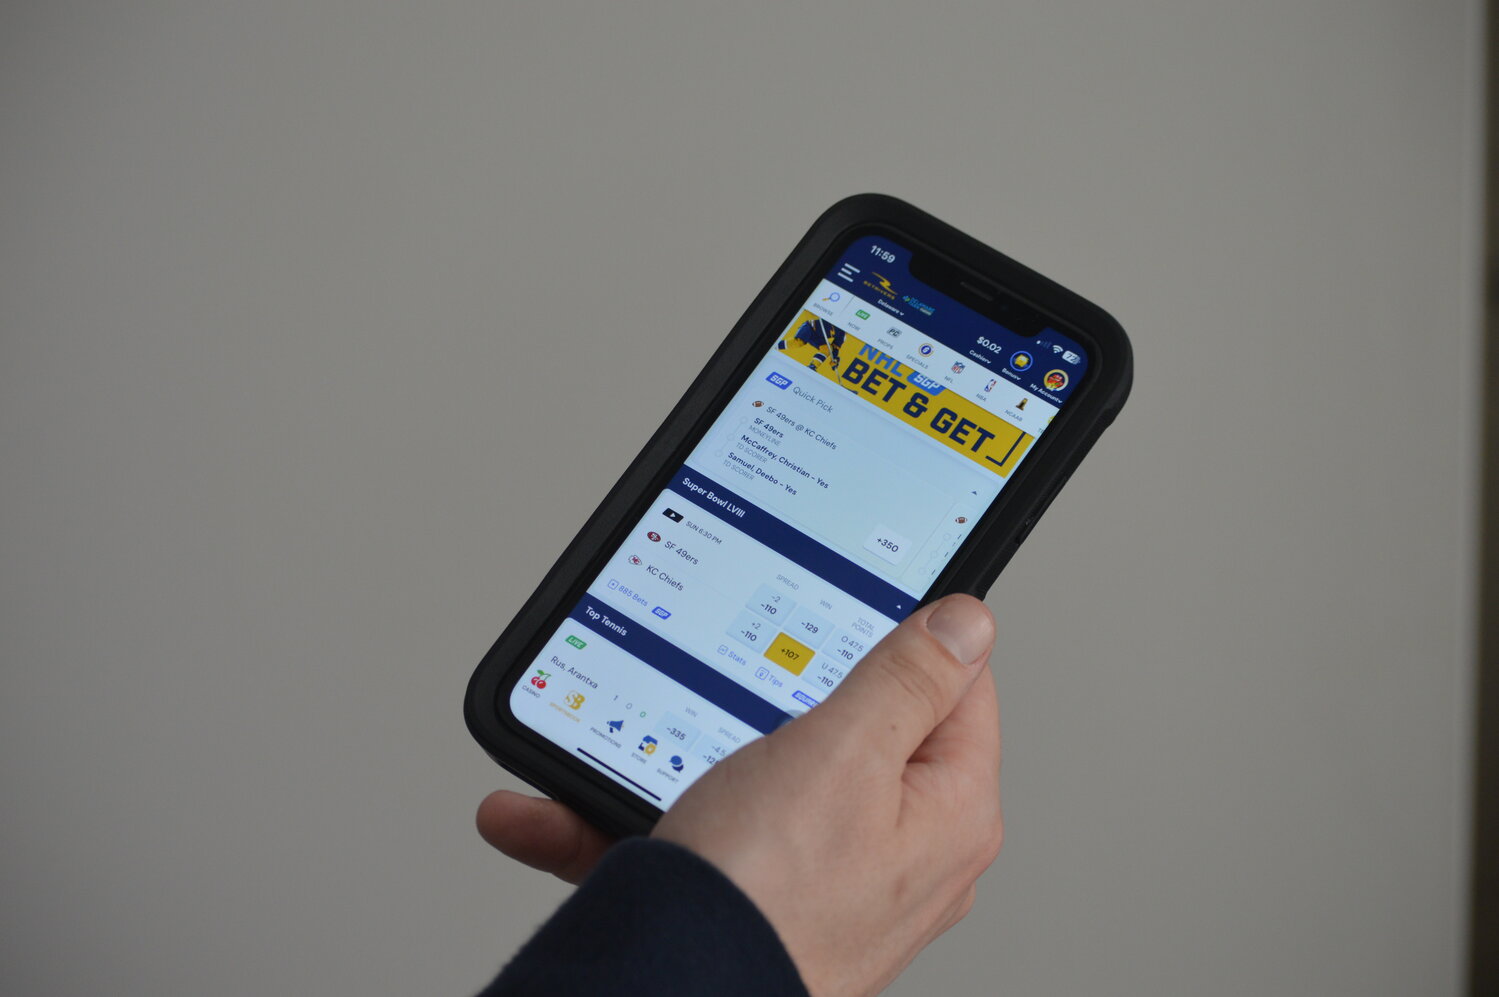 Delawareans can utilize a number of sportsbook and casino offerings on the newly launched BetRivers app.